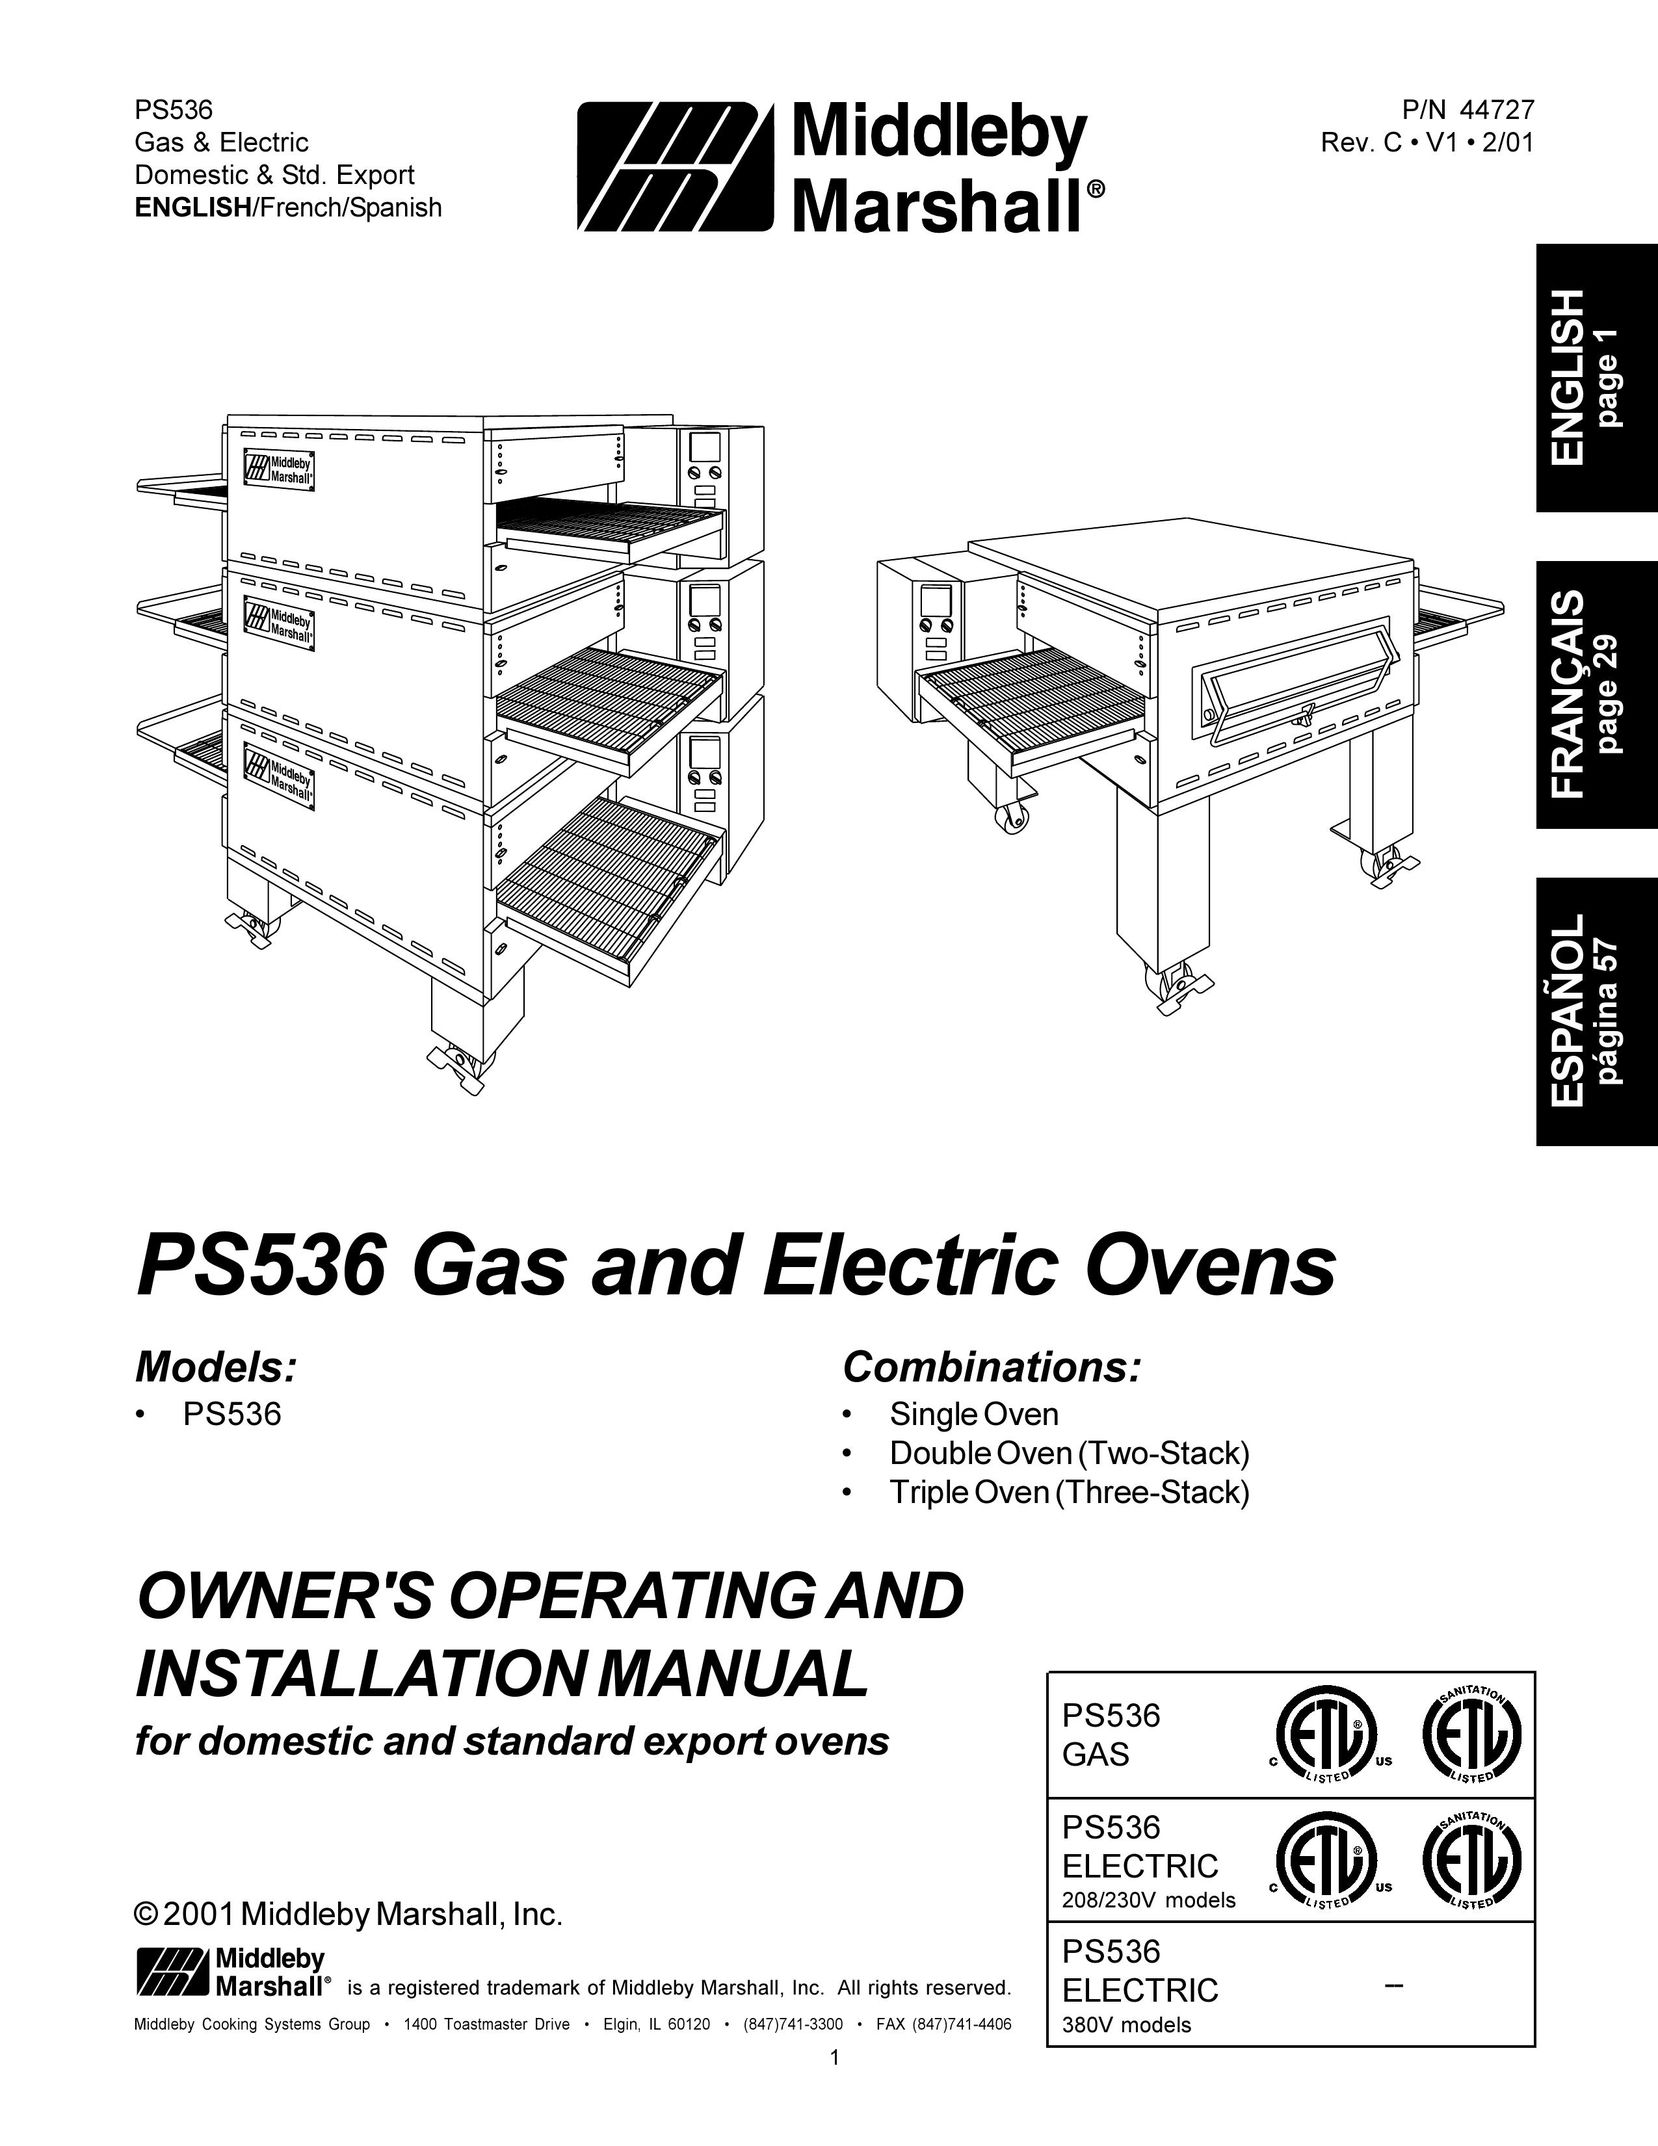 Middleby Cooking Systems Group PS536 Oven User Manual